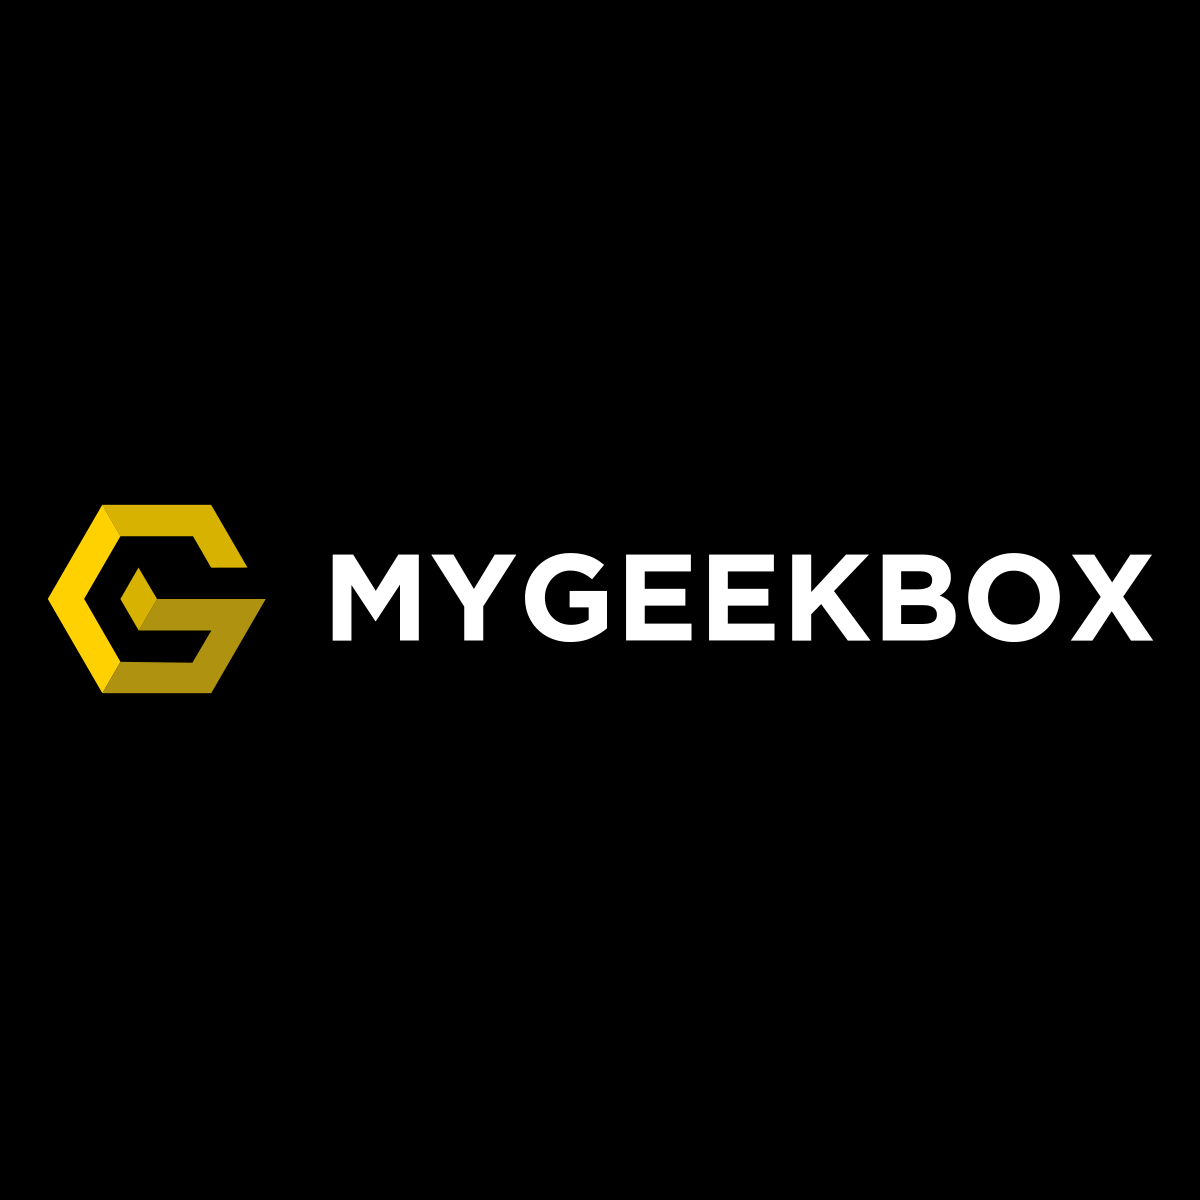 Geek Subscription Box for Gamers & Nerds